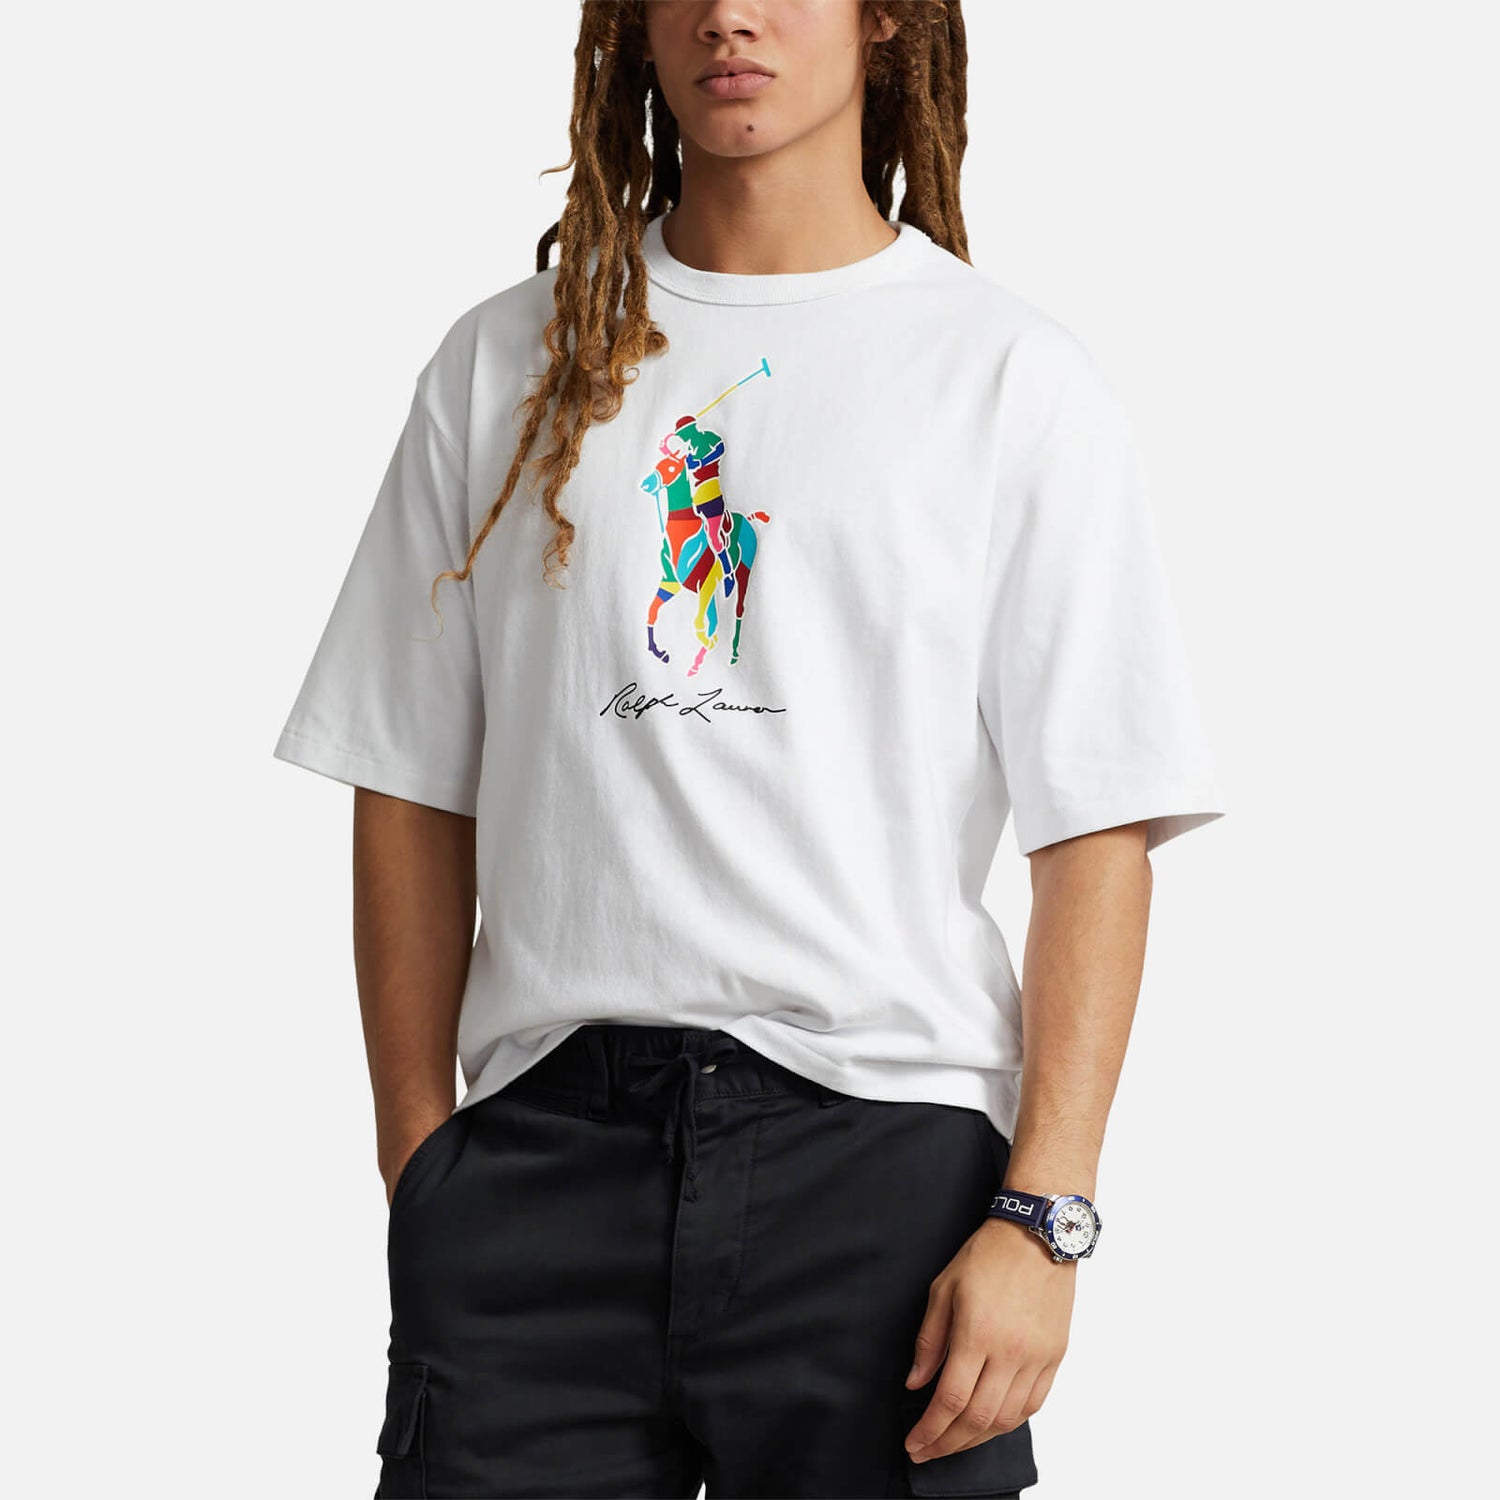 Polo Ralph Lauren Relaxed-Fit Jersey-T-Shirt mit Big Pony - White - M